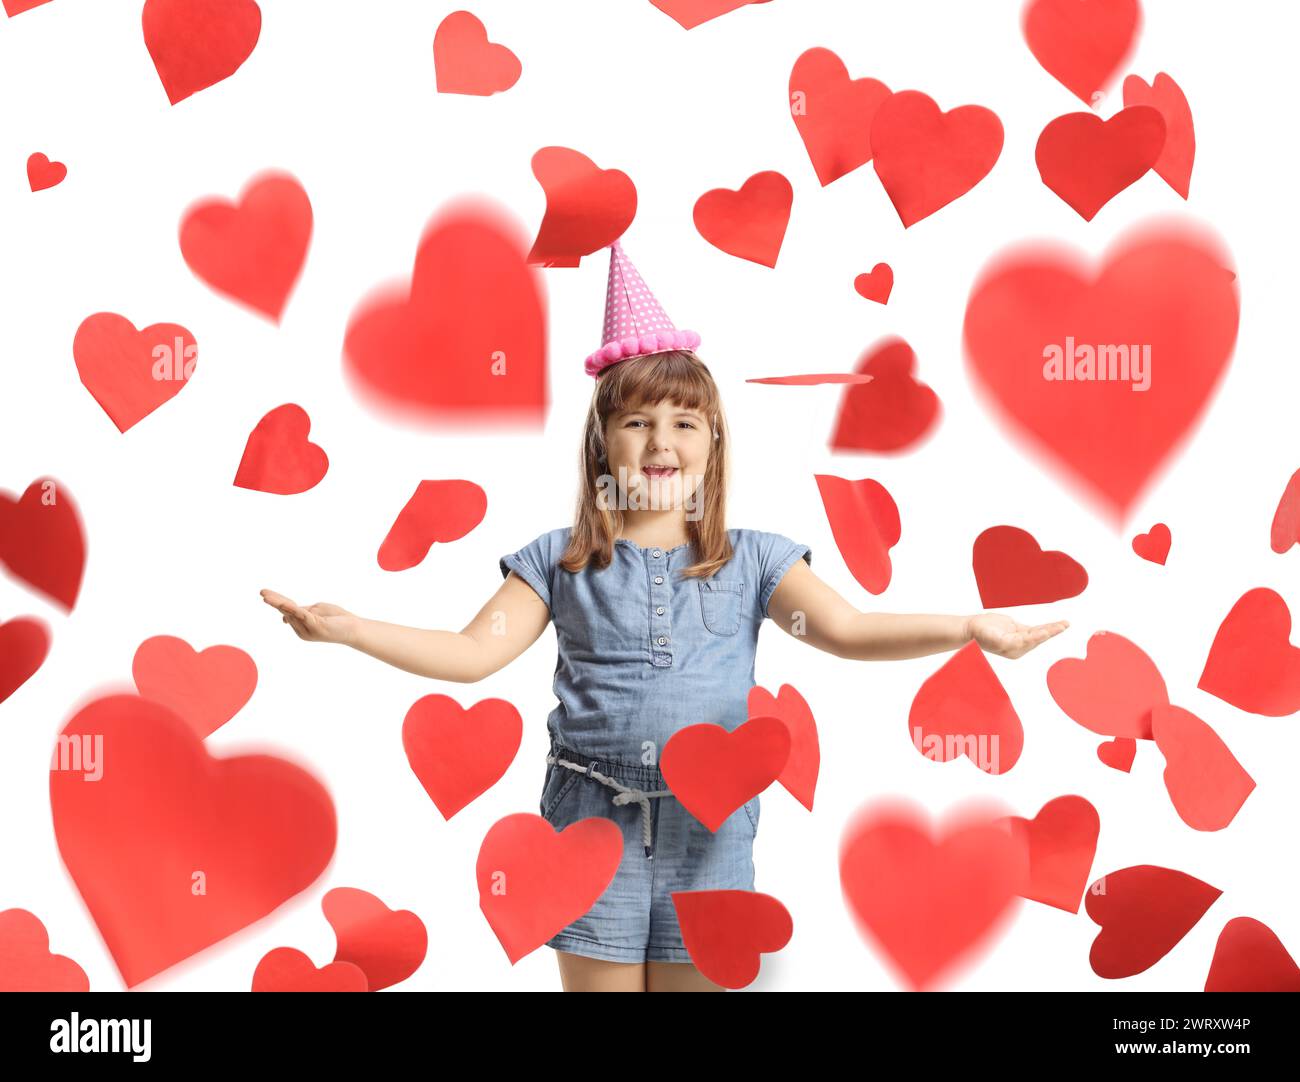 Excited little girl with a birthday hat under red heart confetti isolated on white background Stock Photo